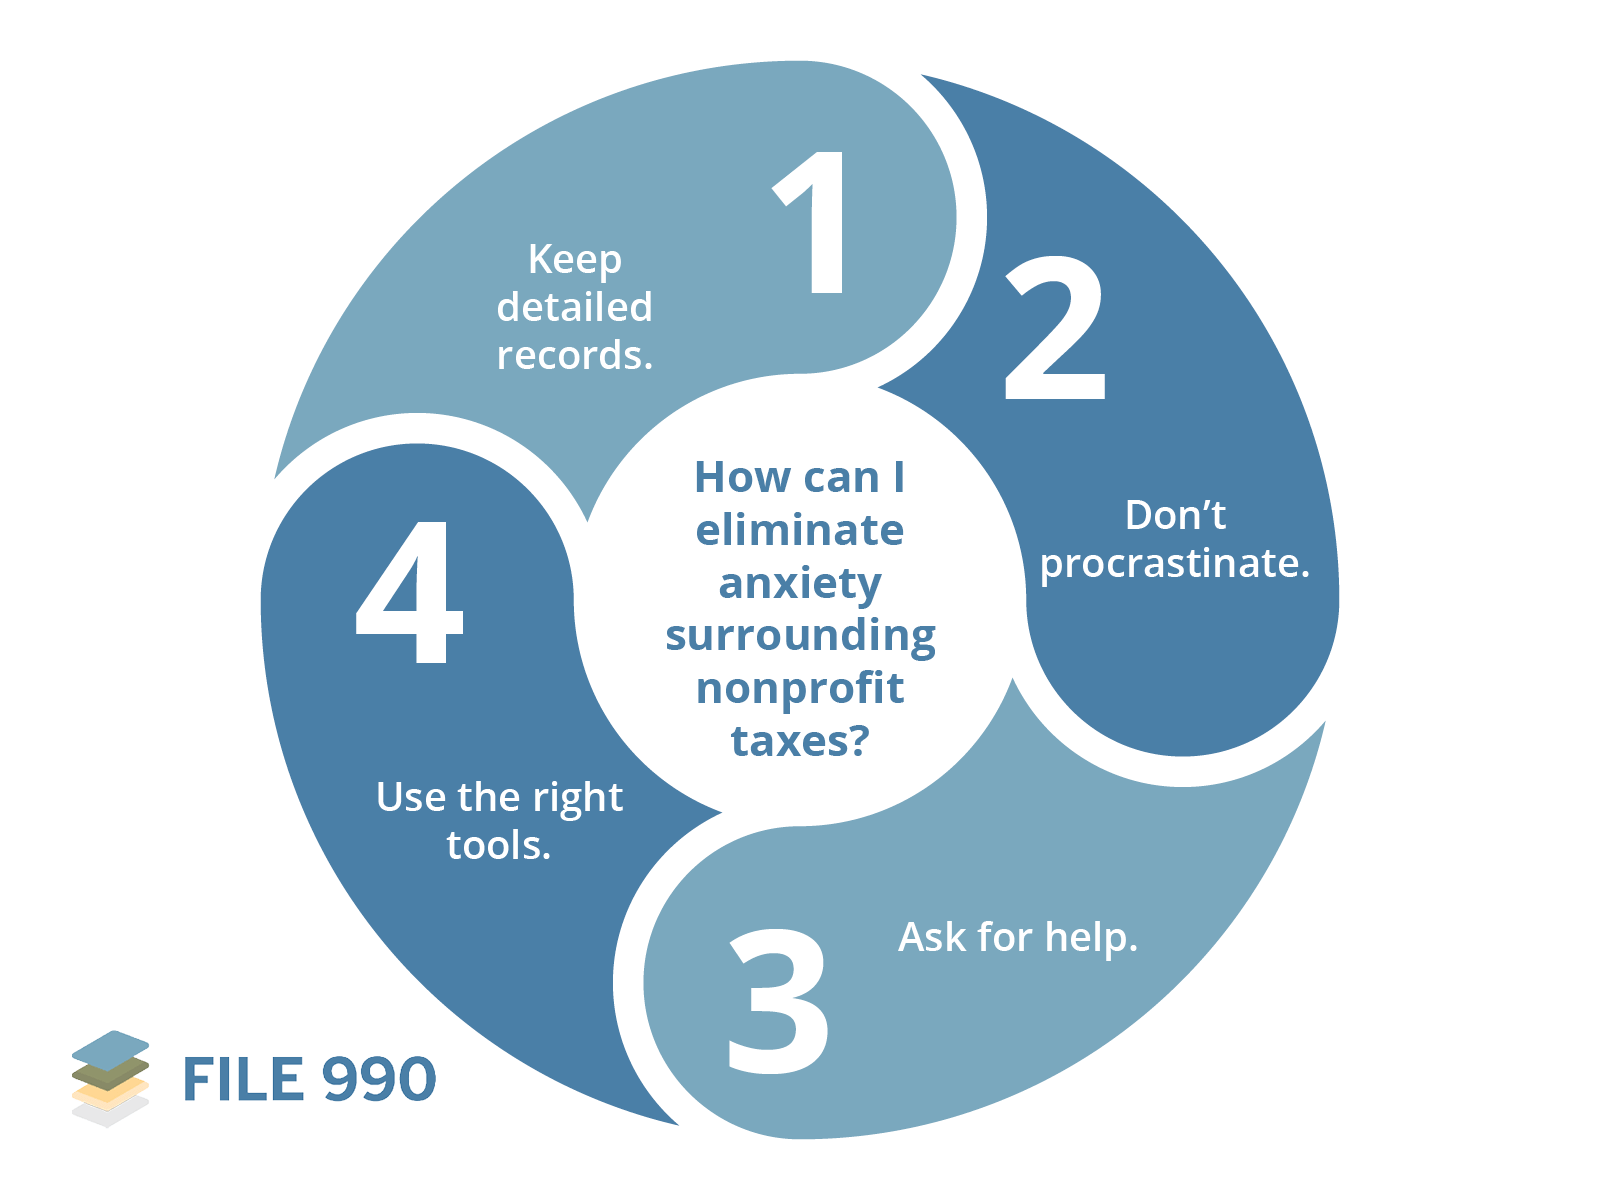 Tips for eliminating nonprofit tax anxiety (as explained below). 